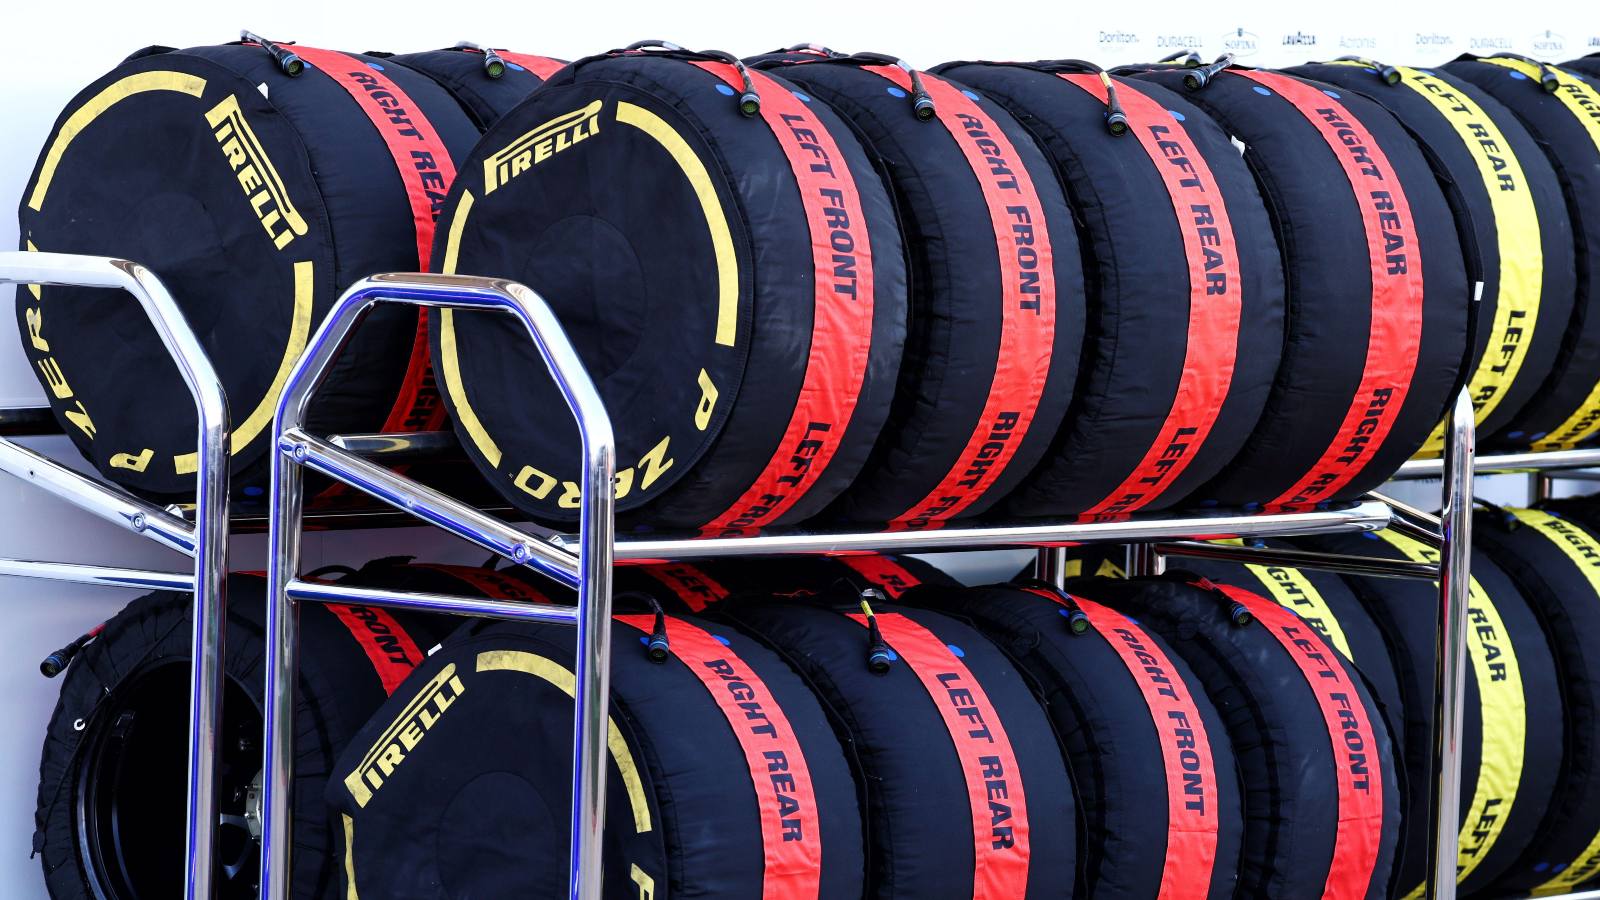 F1 Tyres in tyre blankets. Austin, USA. October, 2022